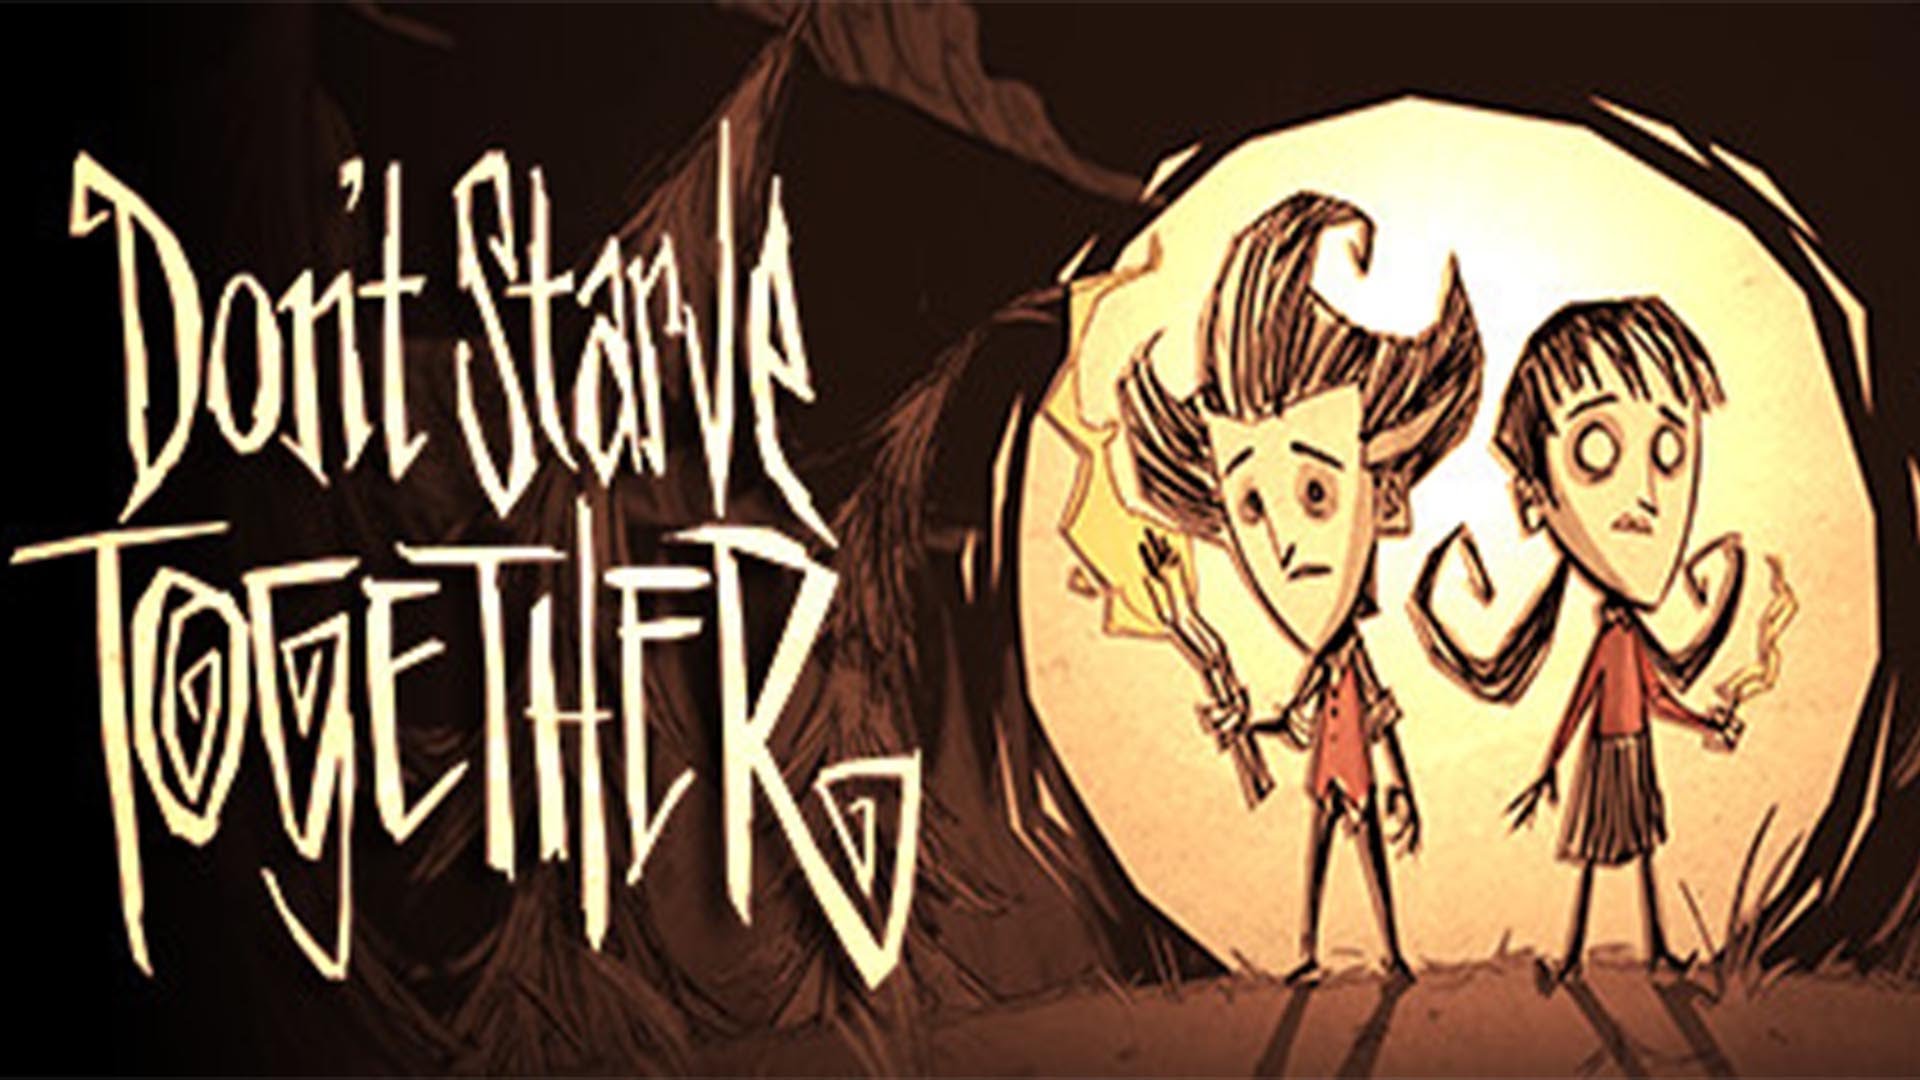 Dont Starve Together 2 copies (Steam RU) + gifts